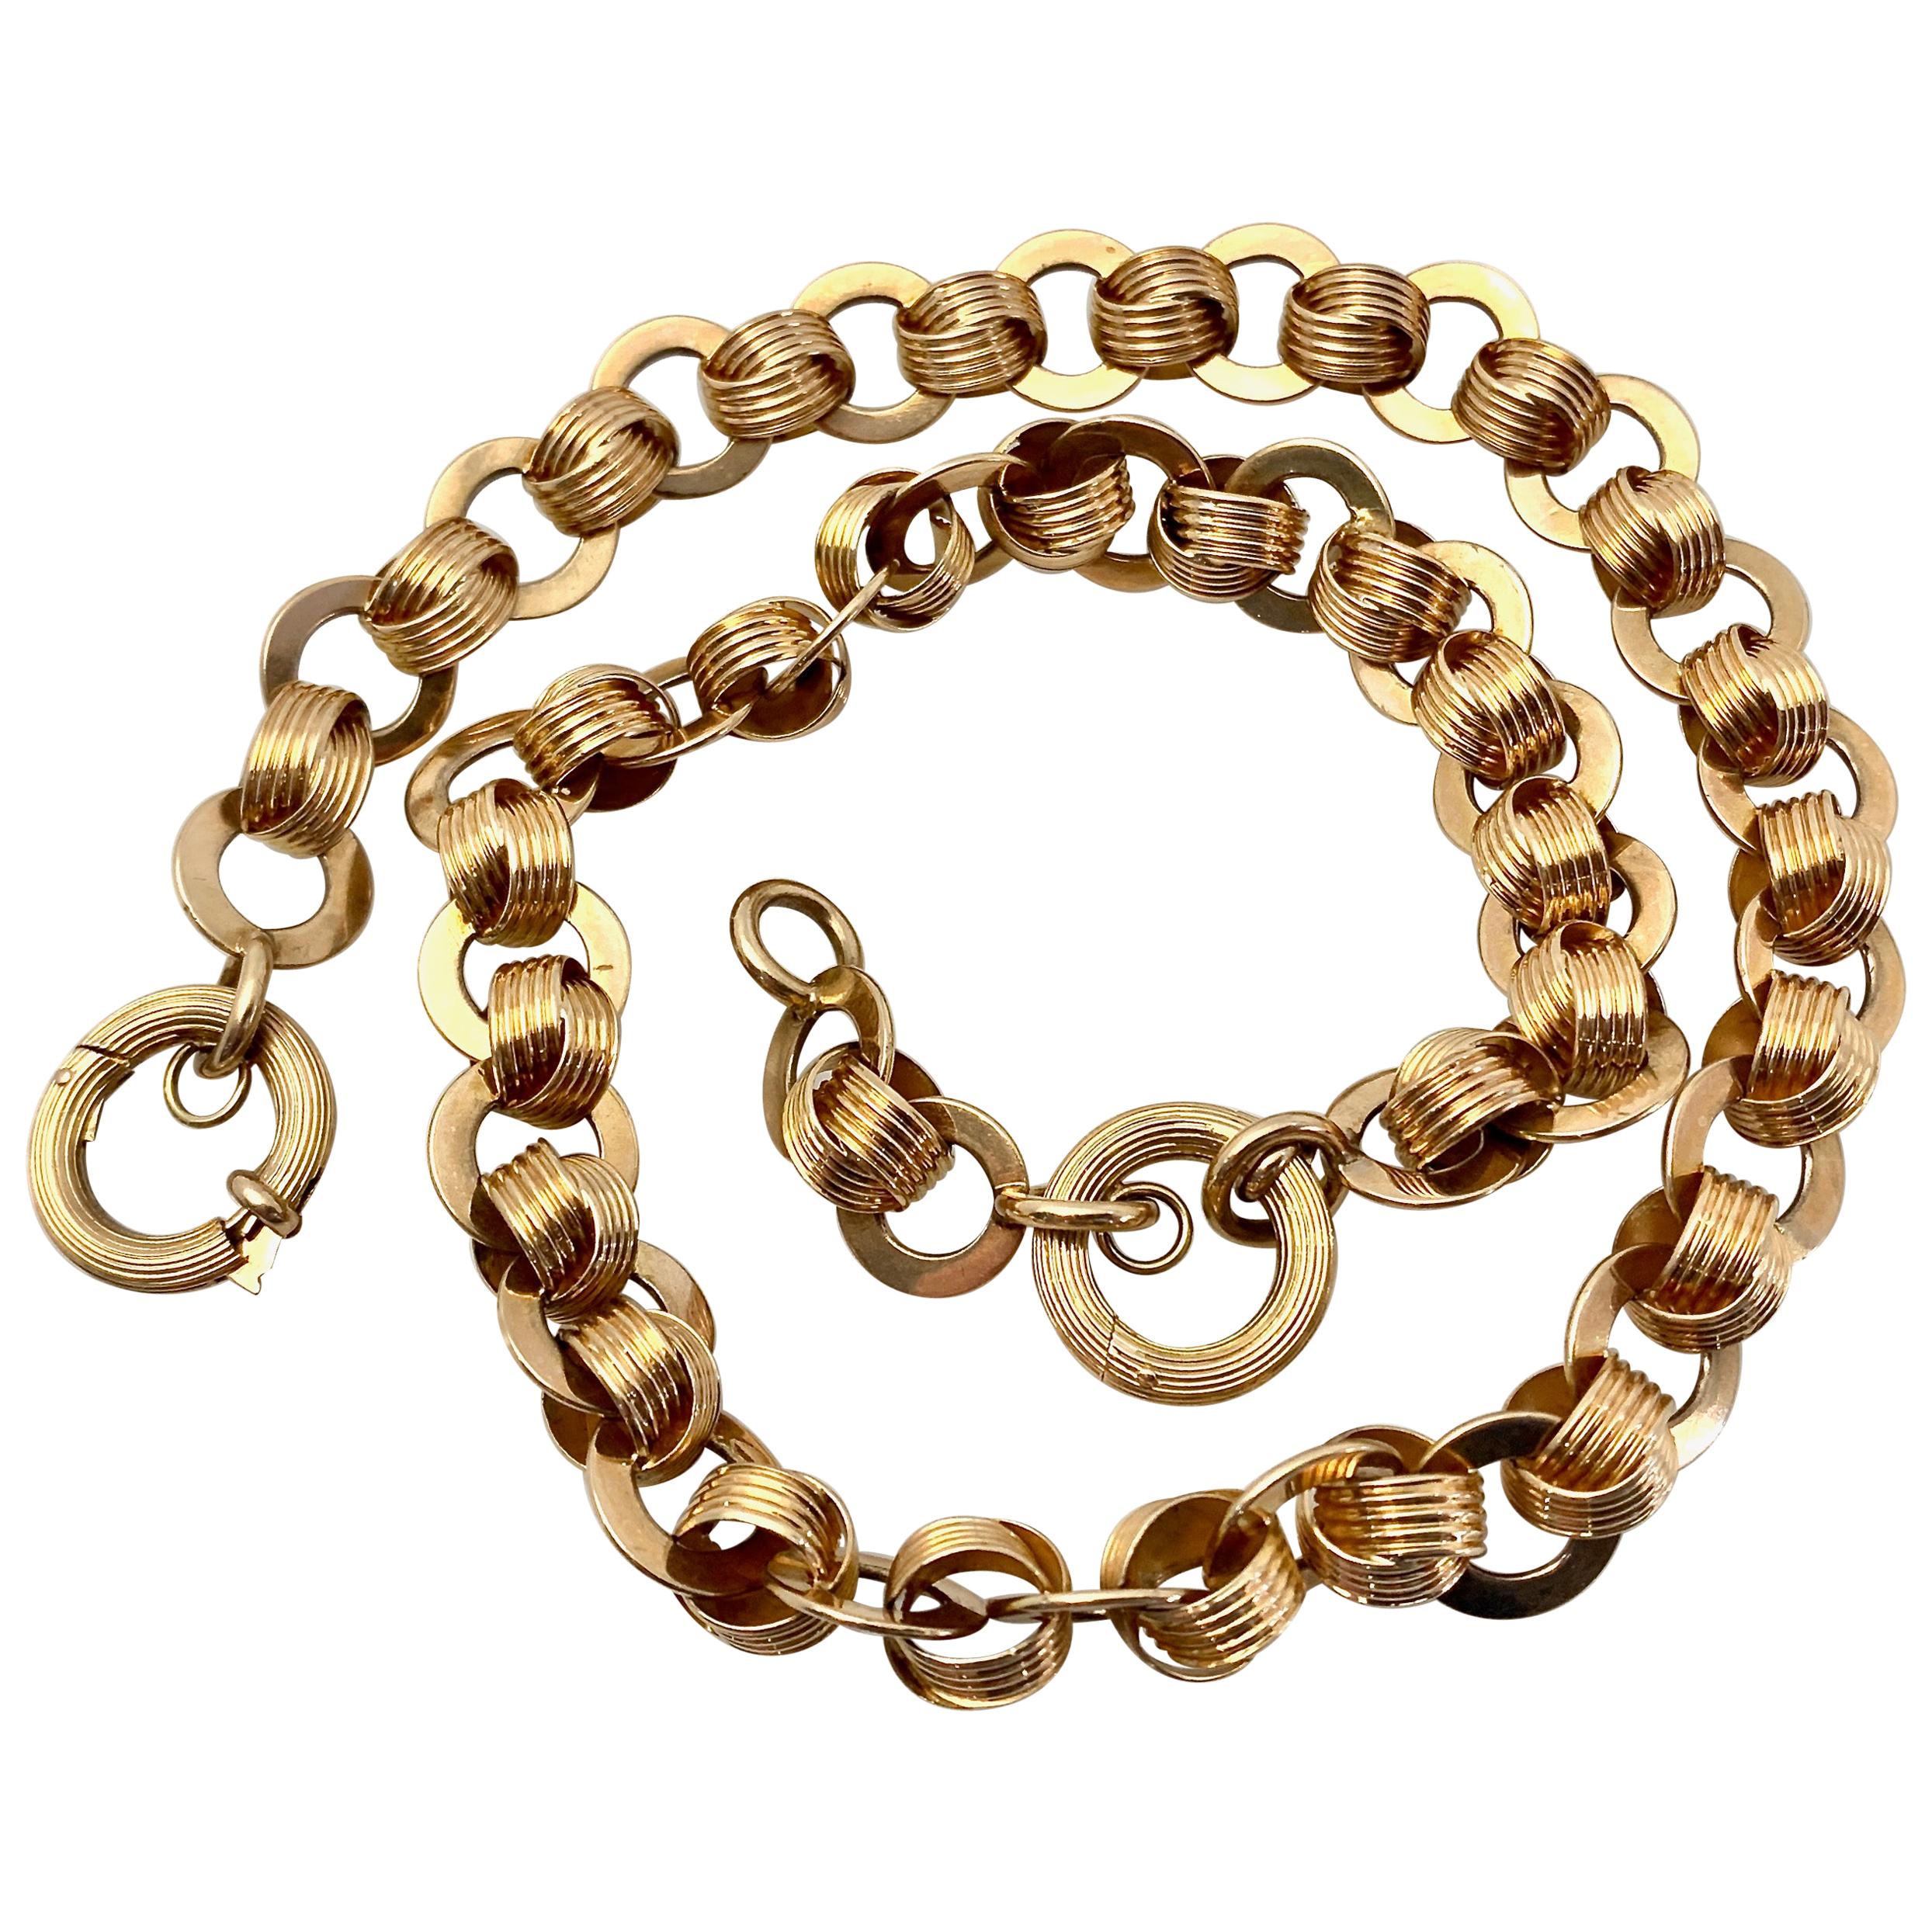 Ring & Connector Chain in 18 Karat Gold with Detachable Extender Fob, circa 1920